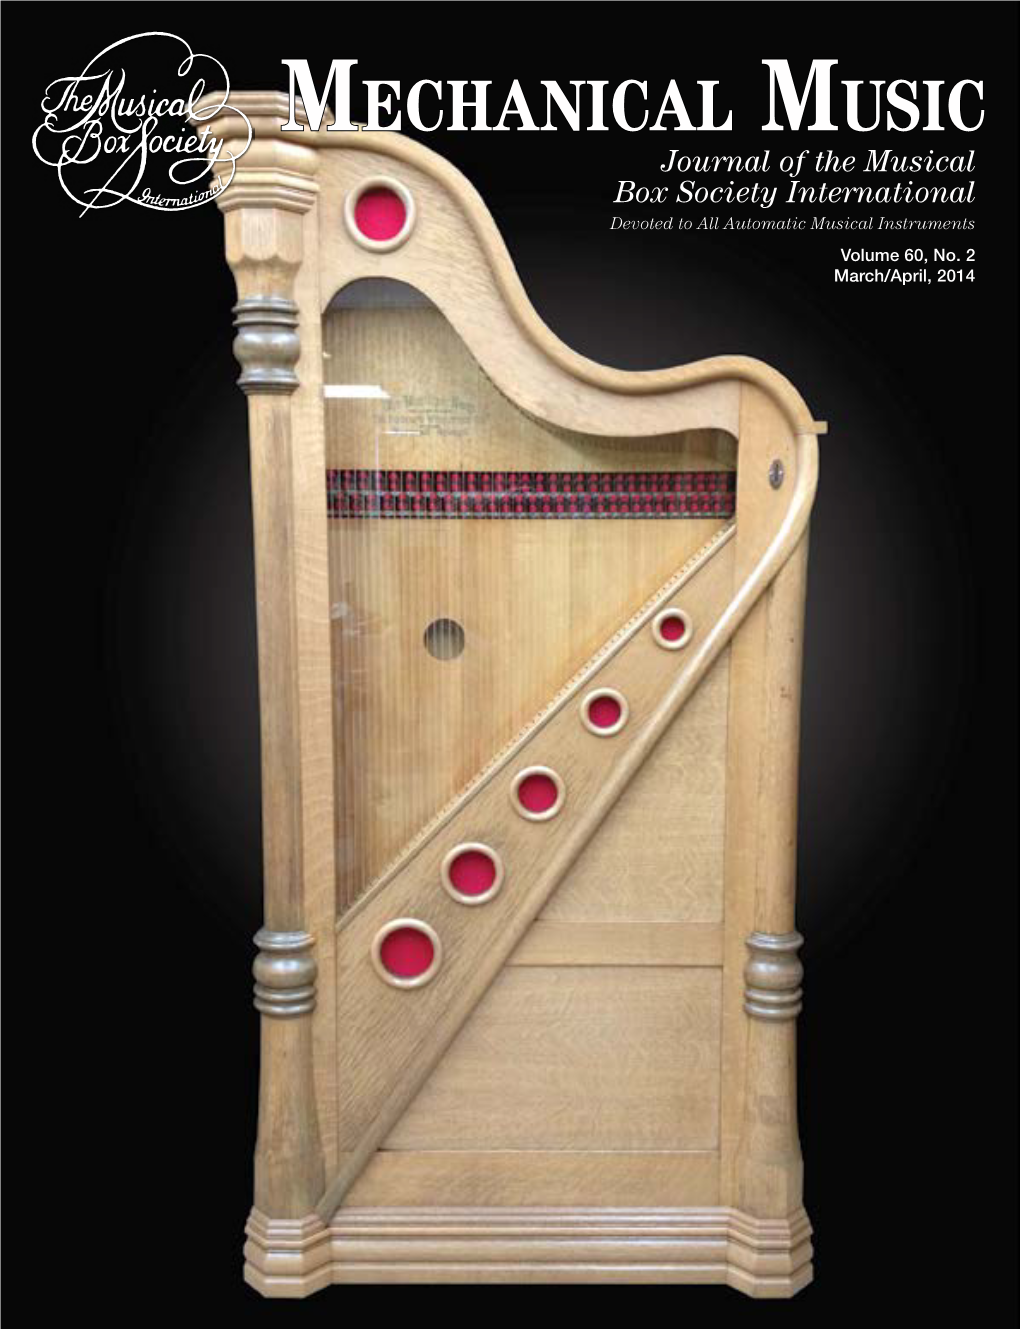 Mechanical Music Journal of the Musical Box Society International Devoted to All Automatic Musical Instruments Volume 60, No